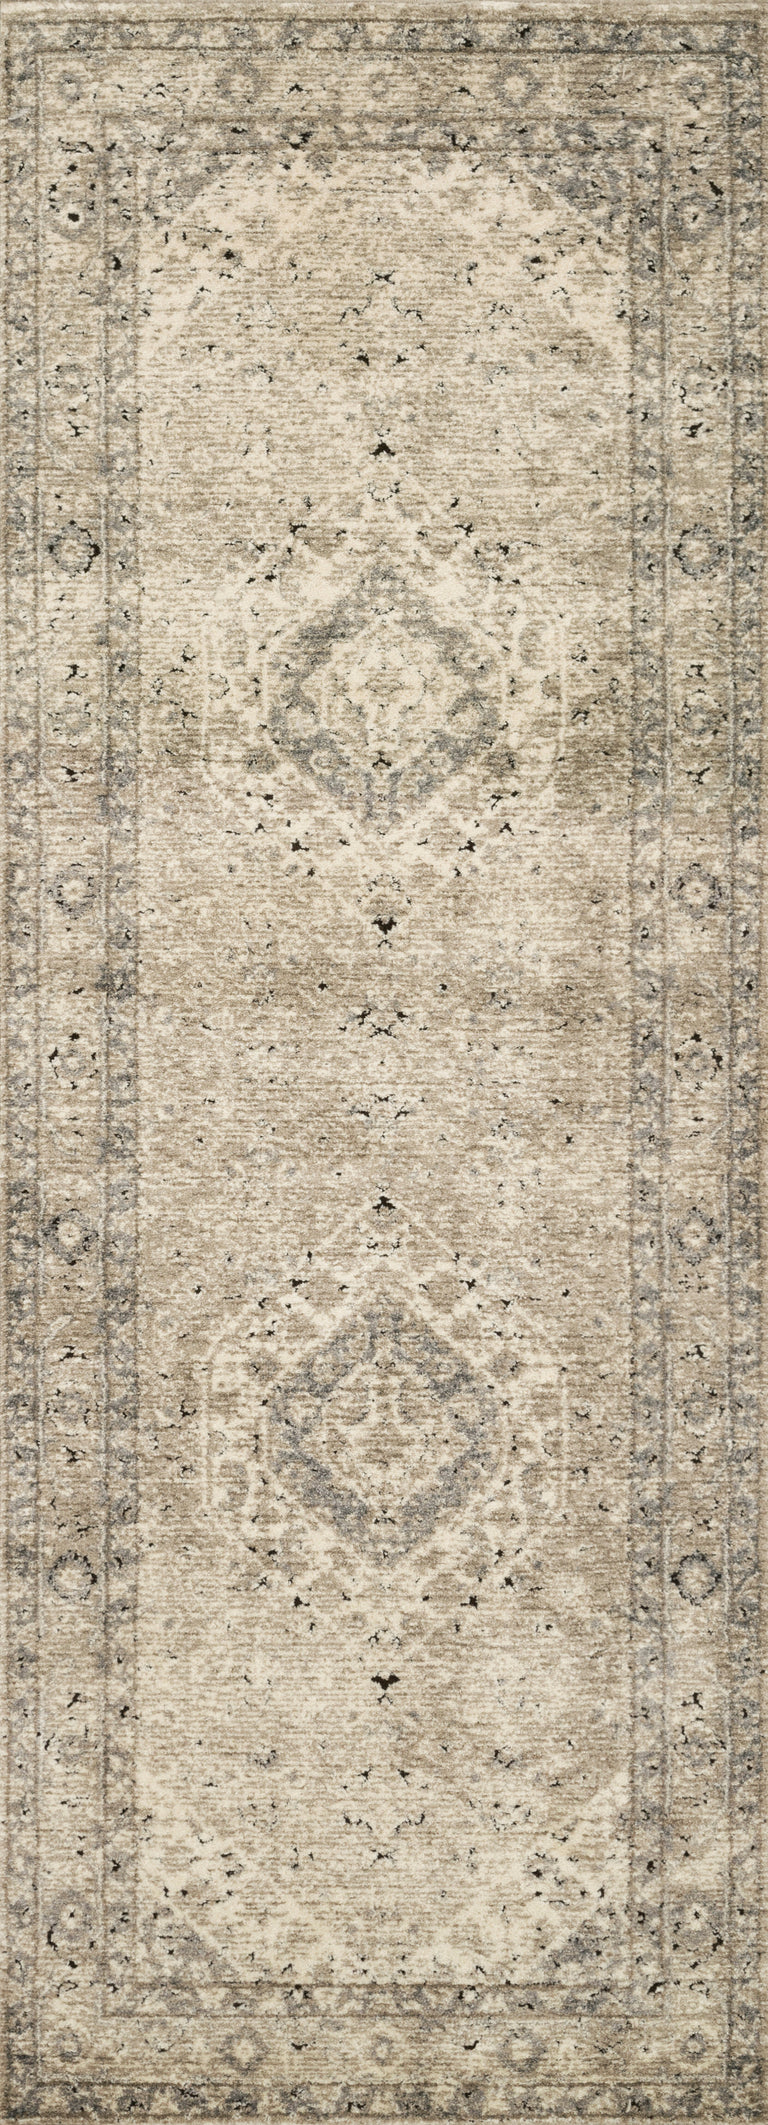 Loloi Rugs Millennium Collection Rug in Sand, Ivory - 7'10" x 10'6"